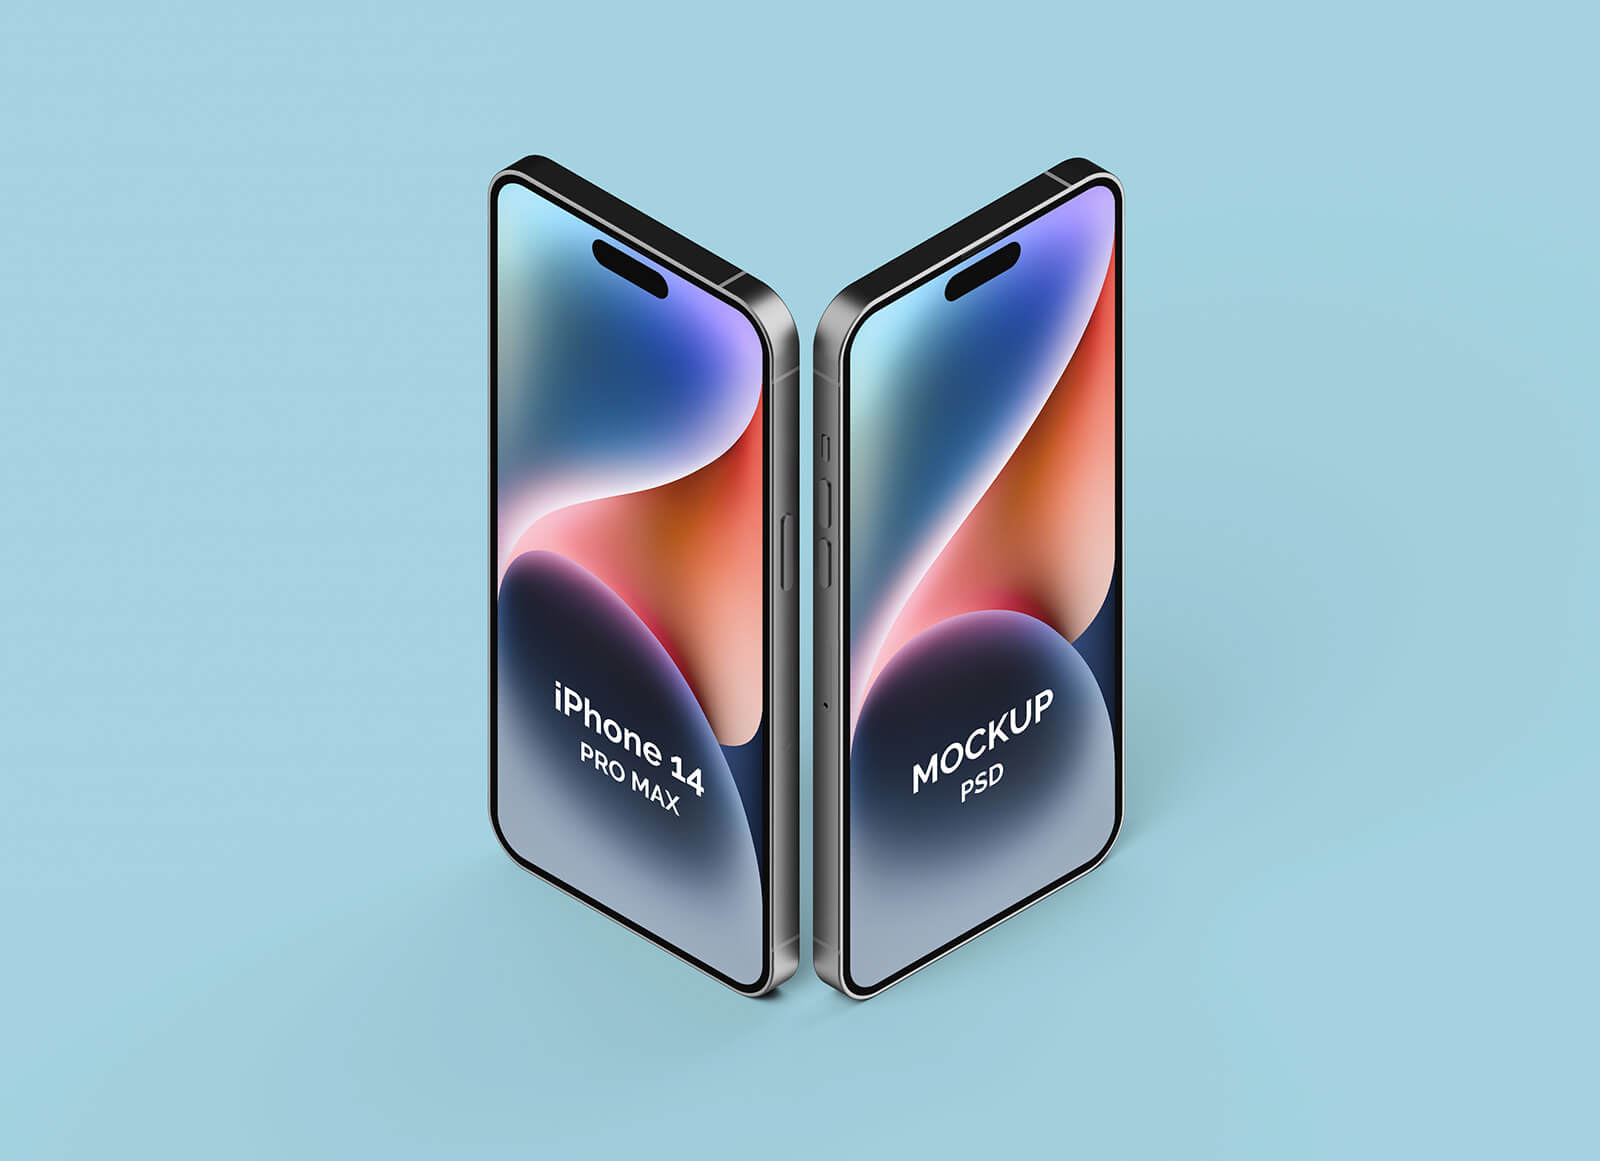 Free Standing Dual iPhone 14 Pro Max Mockup PSD